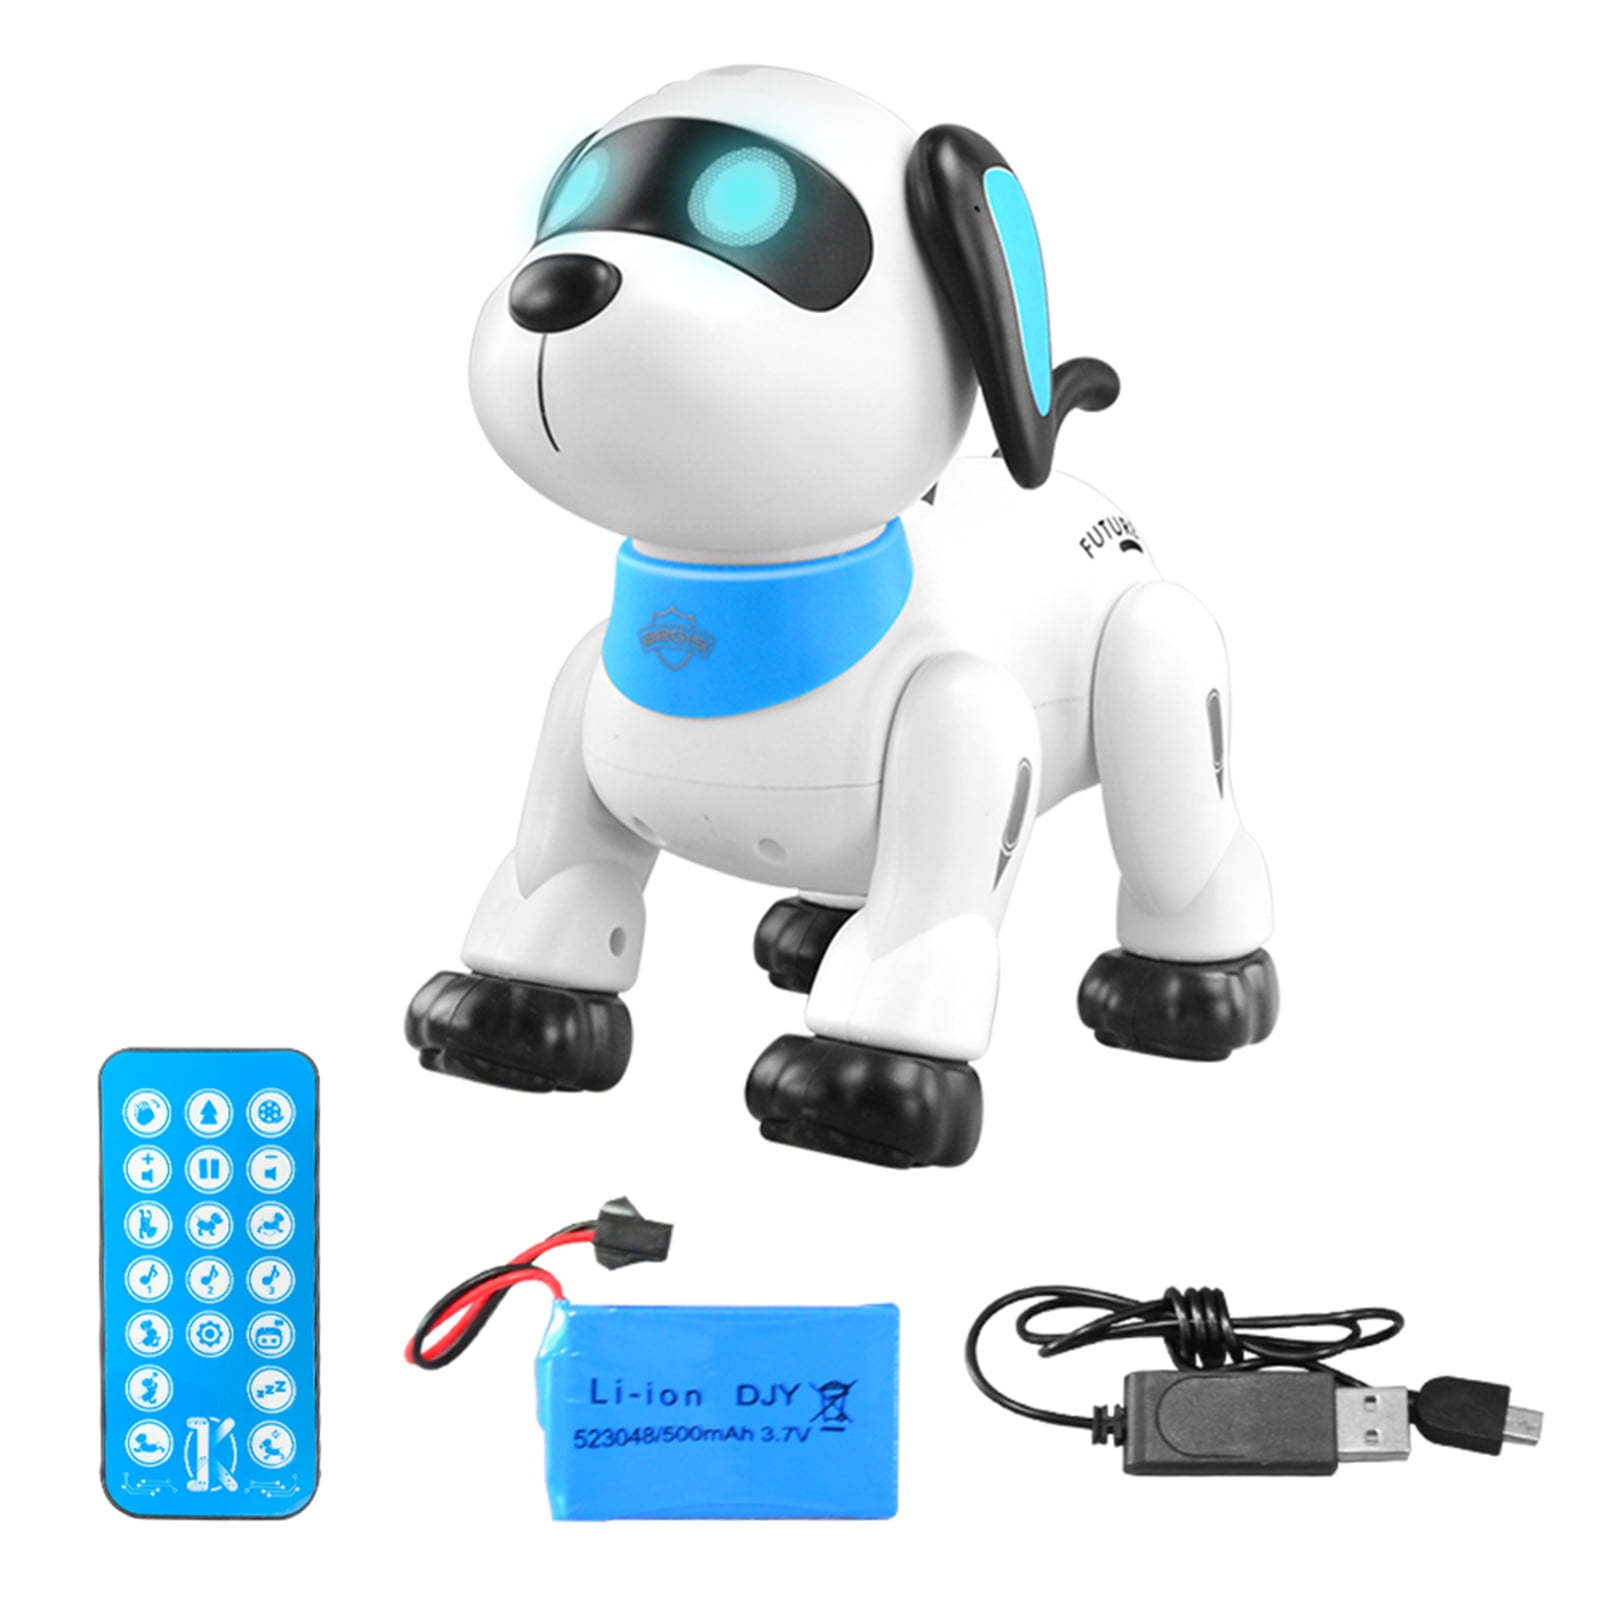 STEMTRON Programmable Interactive & Smart Dancing Remote Control Robot Dog Toy(Pink)